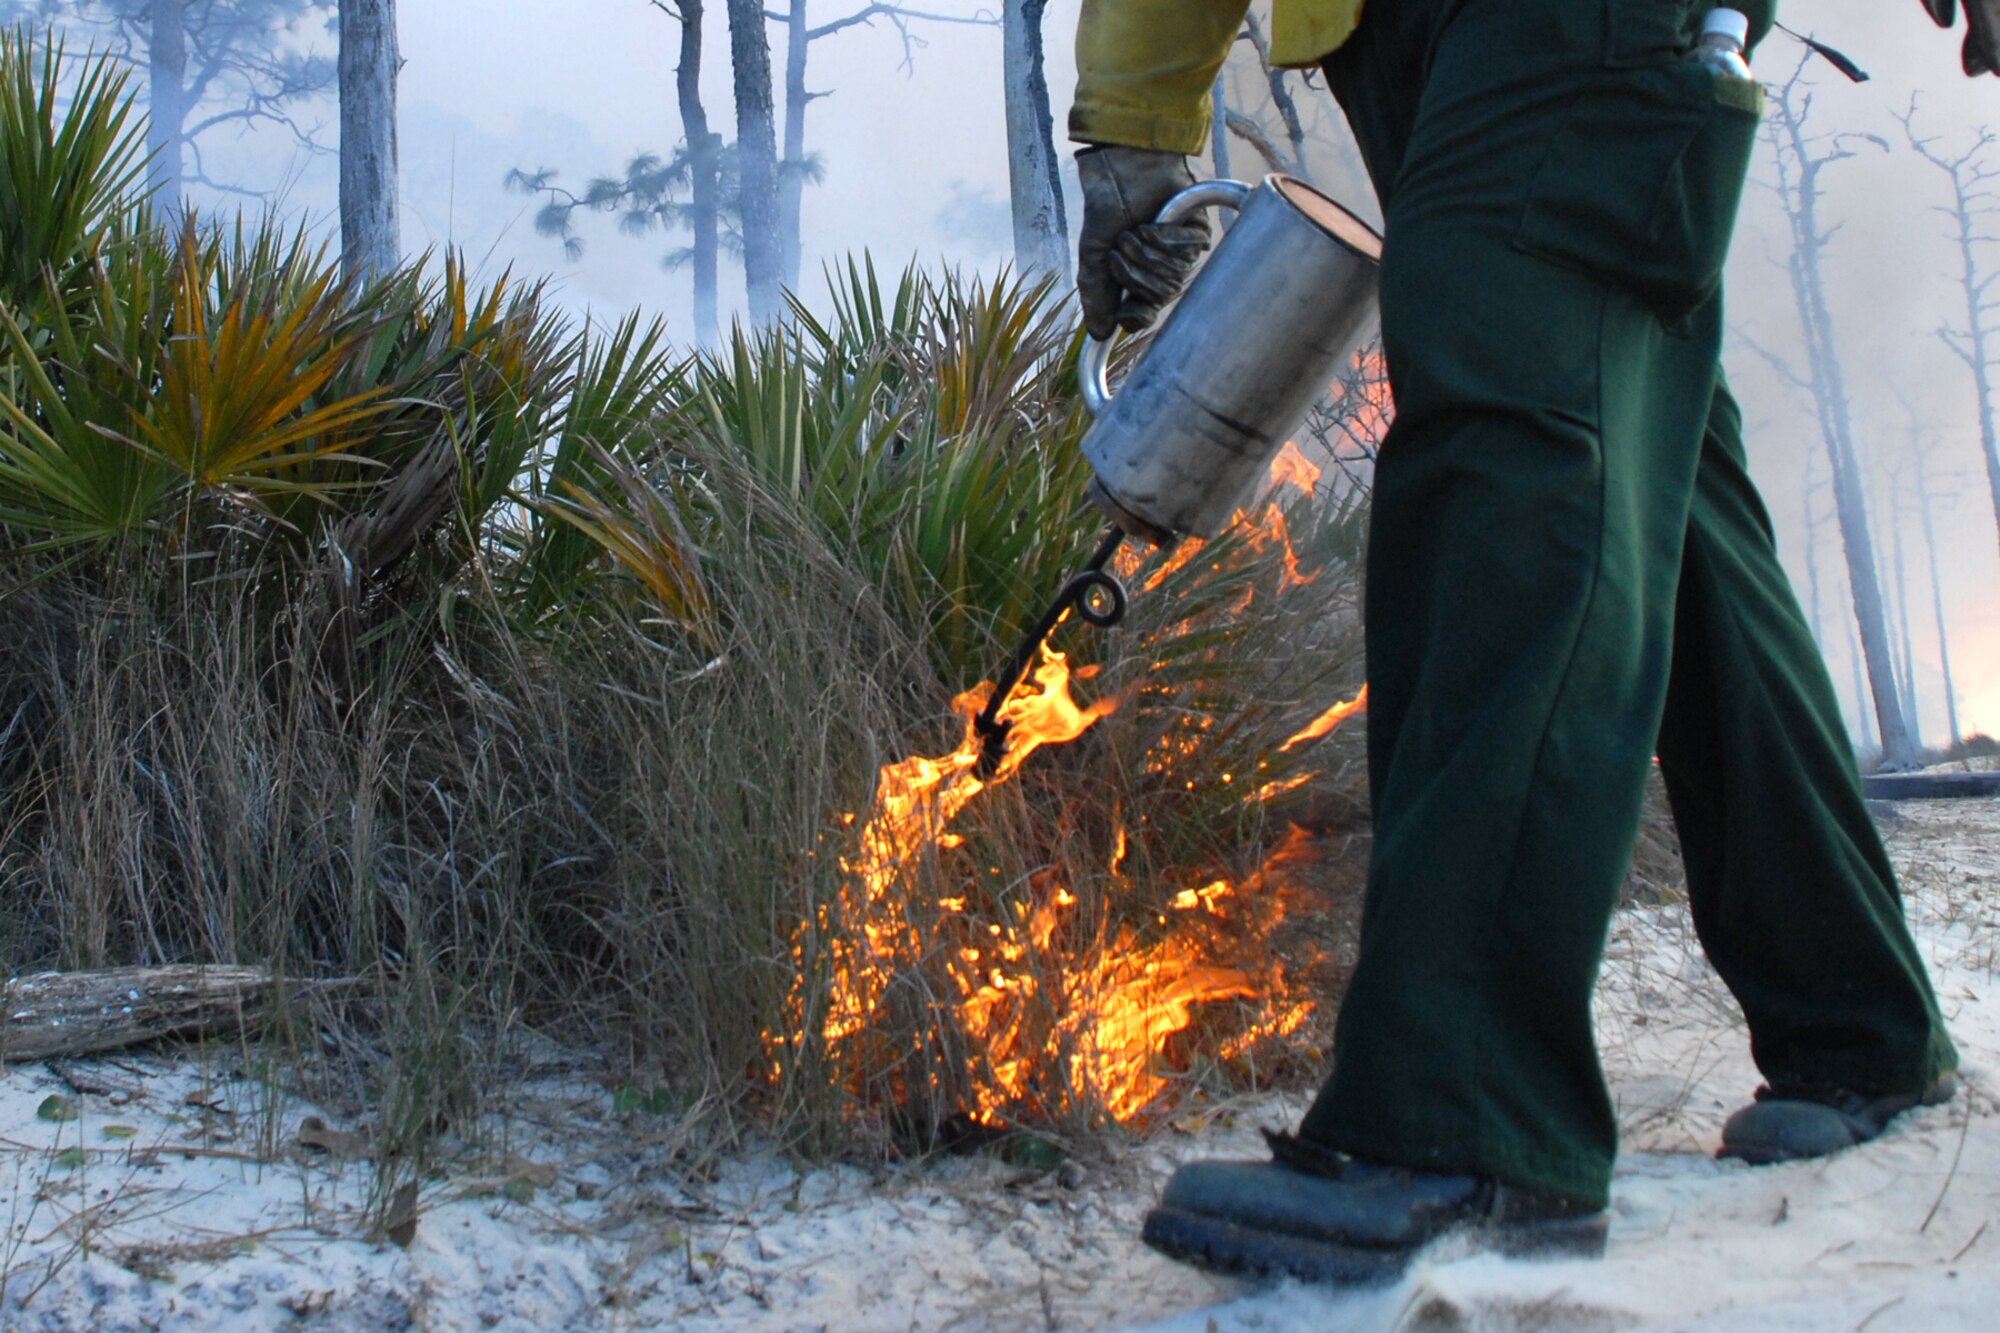 EGLIN AIR FORCE BASE, Fla. -- David Grimm, a Jackson Guard forestry technician and wildland fire specialist, uses a fire drip can to start a fire line during a prescribed burn at White Point, an 85-acre recreation area on the Choctawhatchee Bay Jan. 29. Many native plants and animal species depend on Eglin's fire-dependent long-leaf pine ecosystem, 11 of which are federally protected. Endangered species such as the red-cockaded woodpecker, depend on fire that is typically caused by either lightning strikes or Eglin's resident fire managers to survive. As of the 2008 control burn season, Jackson Guard's five-year average is 73,000 acres burned annually. (U.S. Air Force Photo by Staff Sgt. Mike Meares)